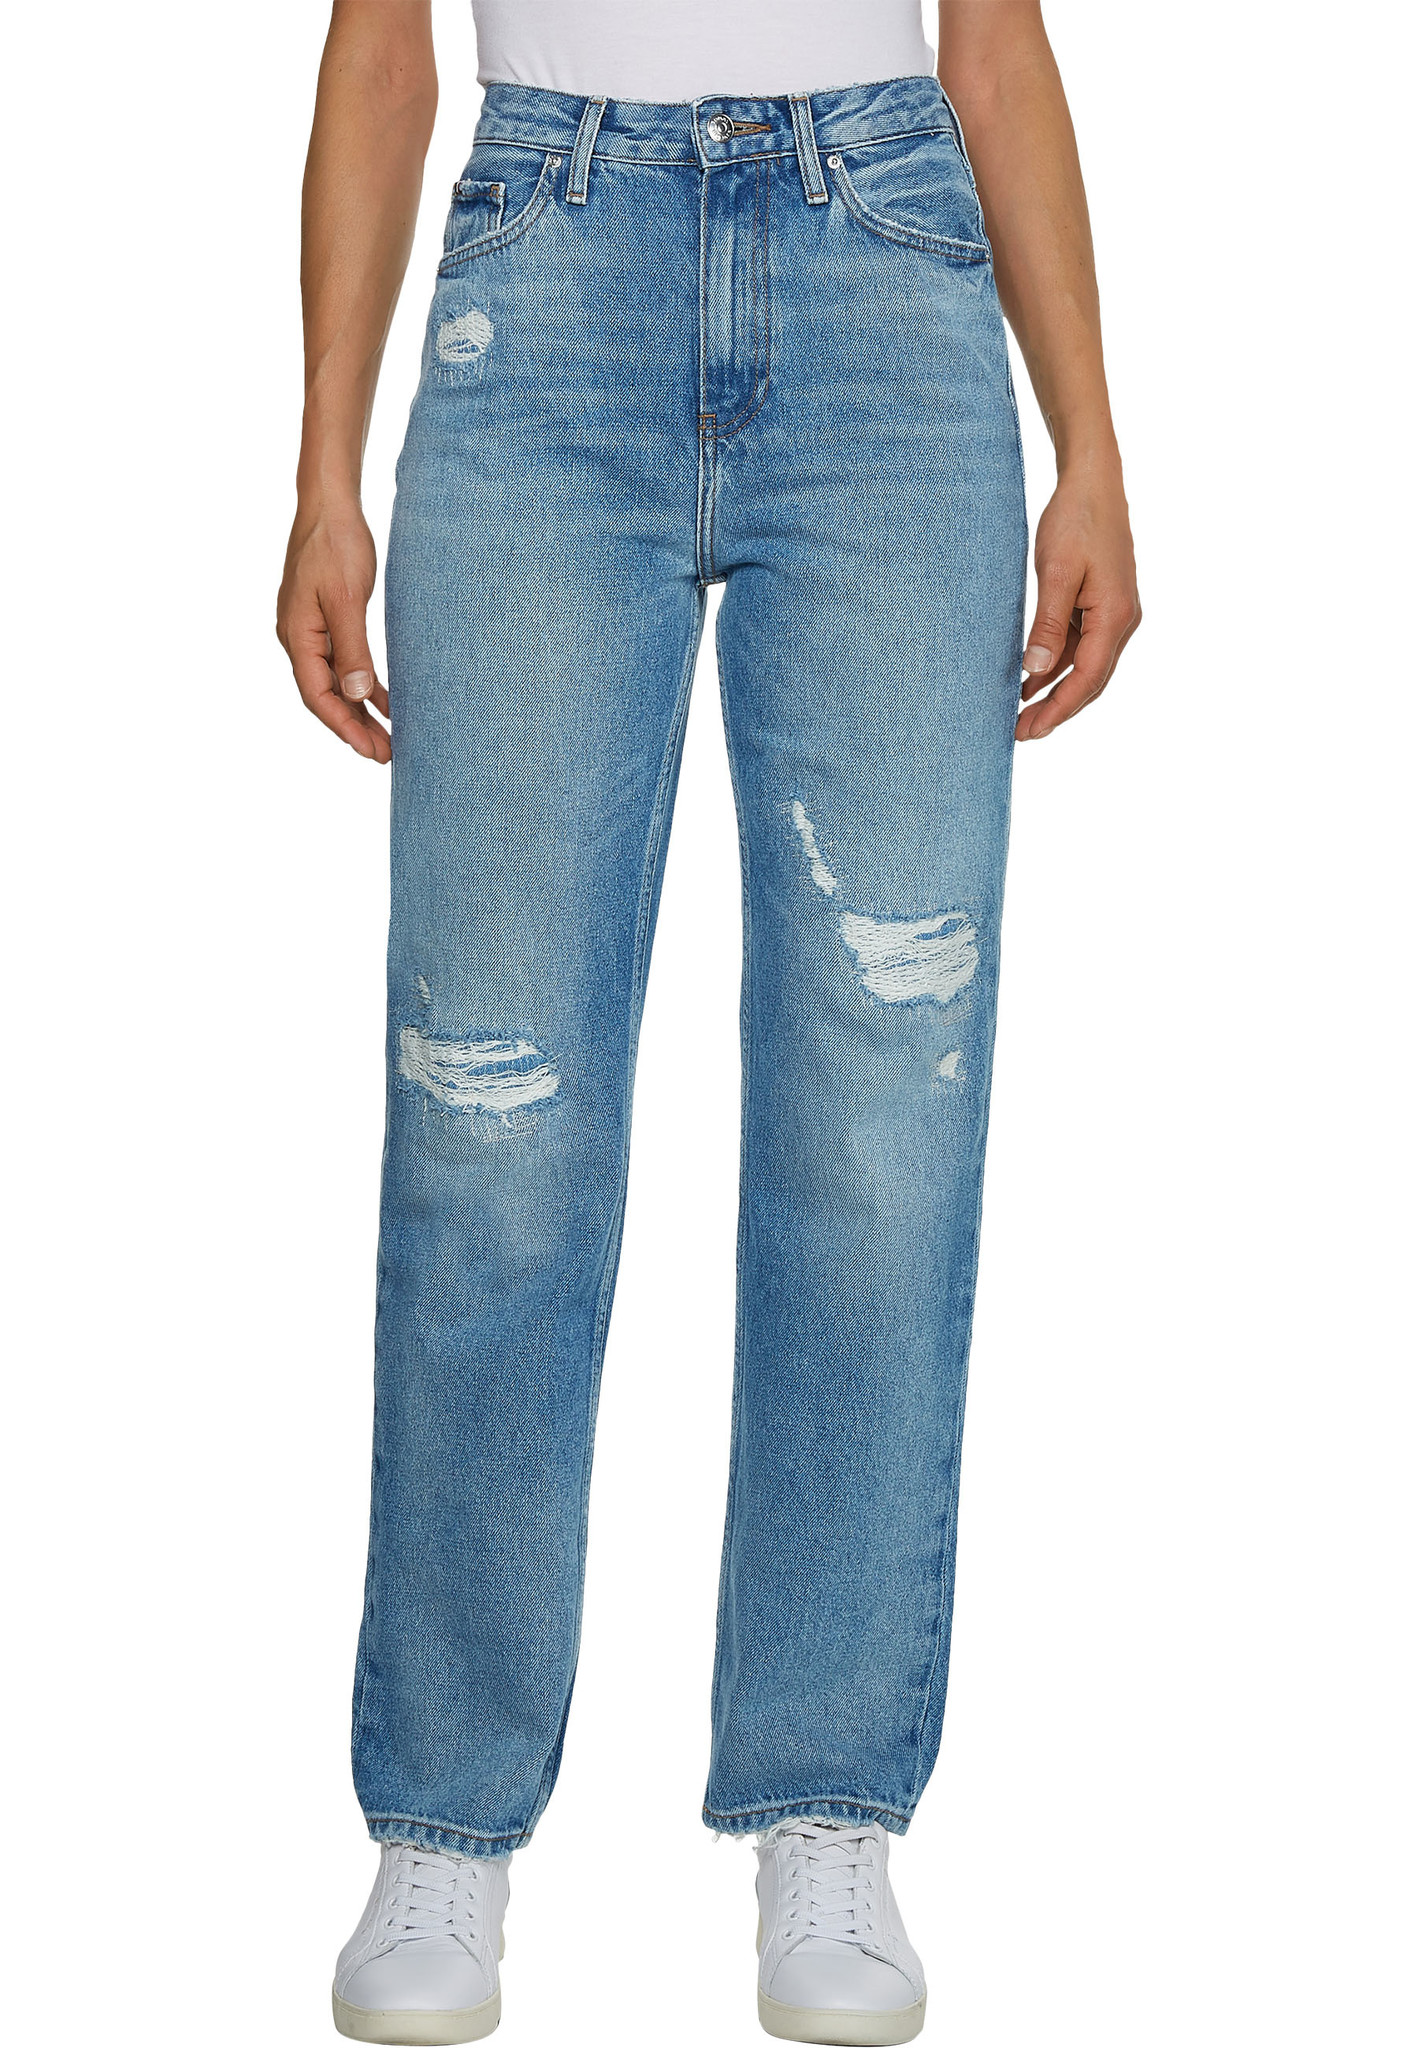 Tommy Hilfiger New Classic Straight Jeans Lichtblauw Dames maat 32/30